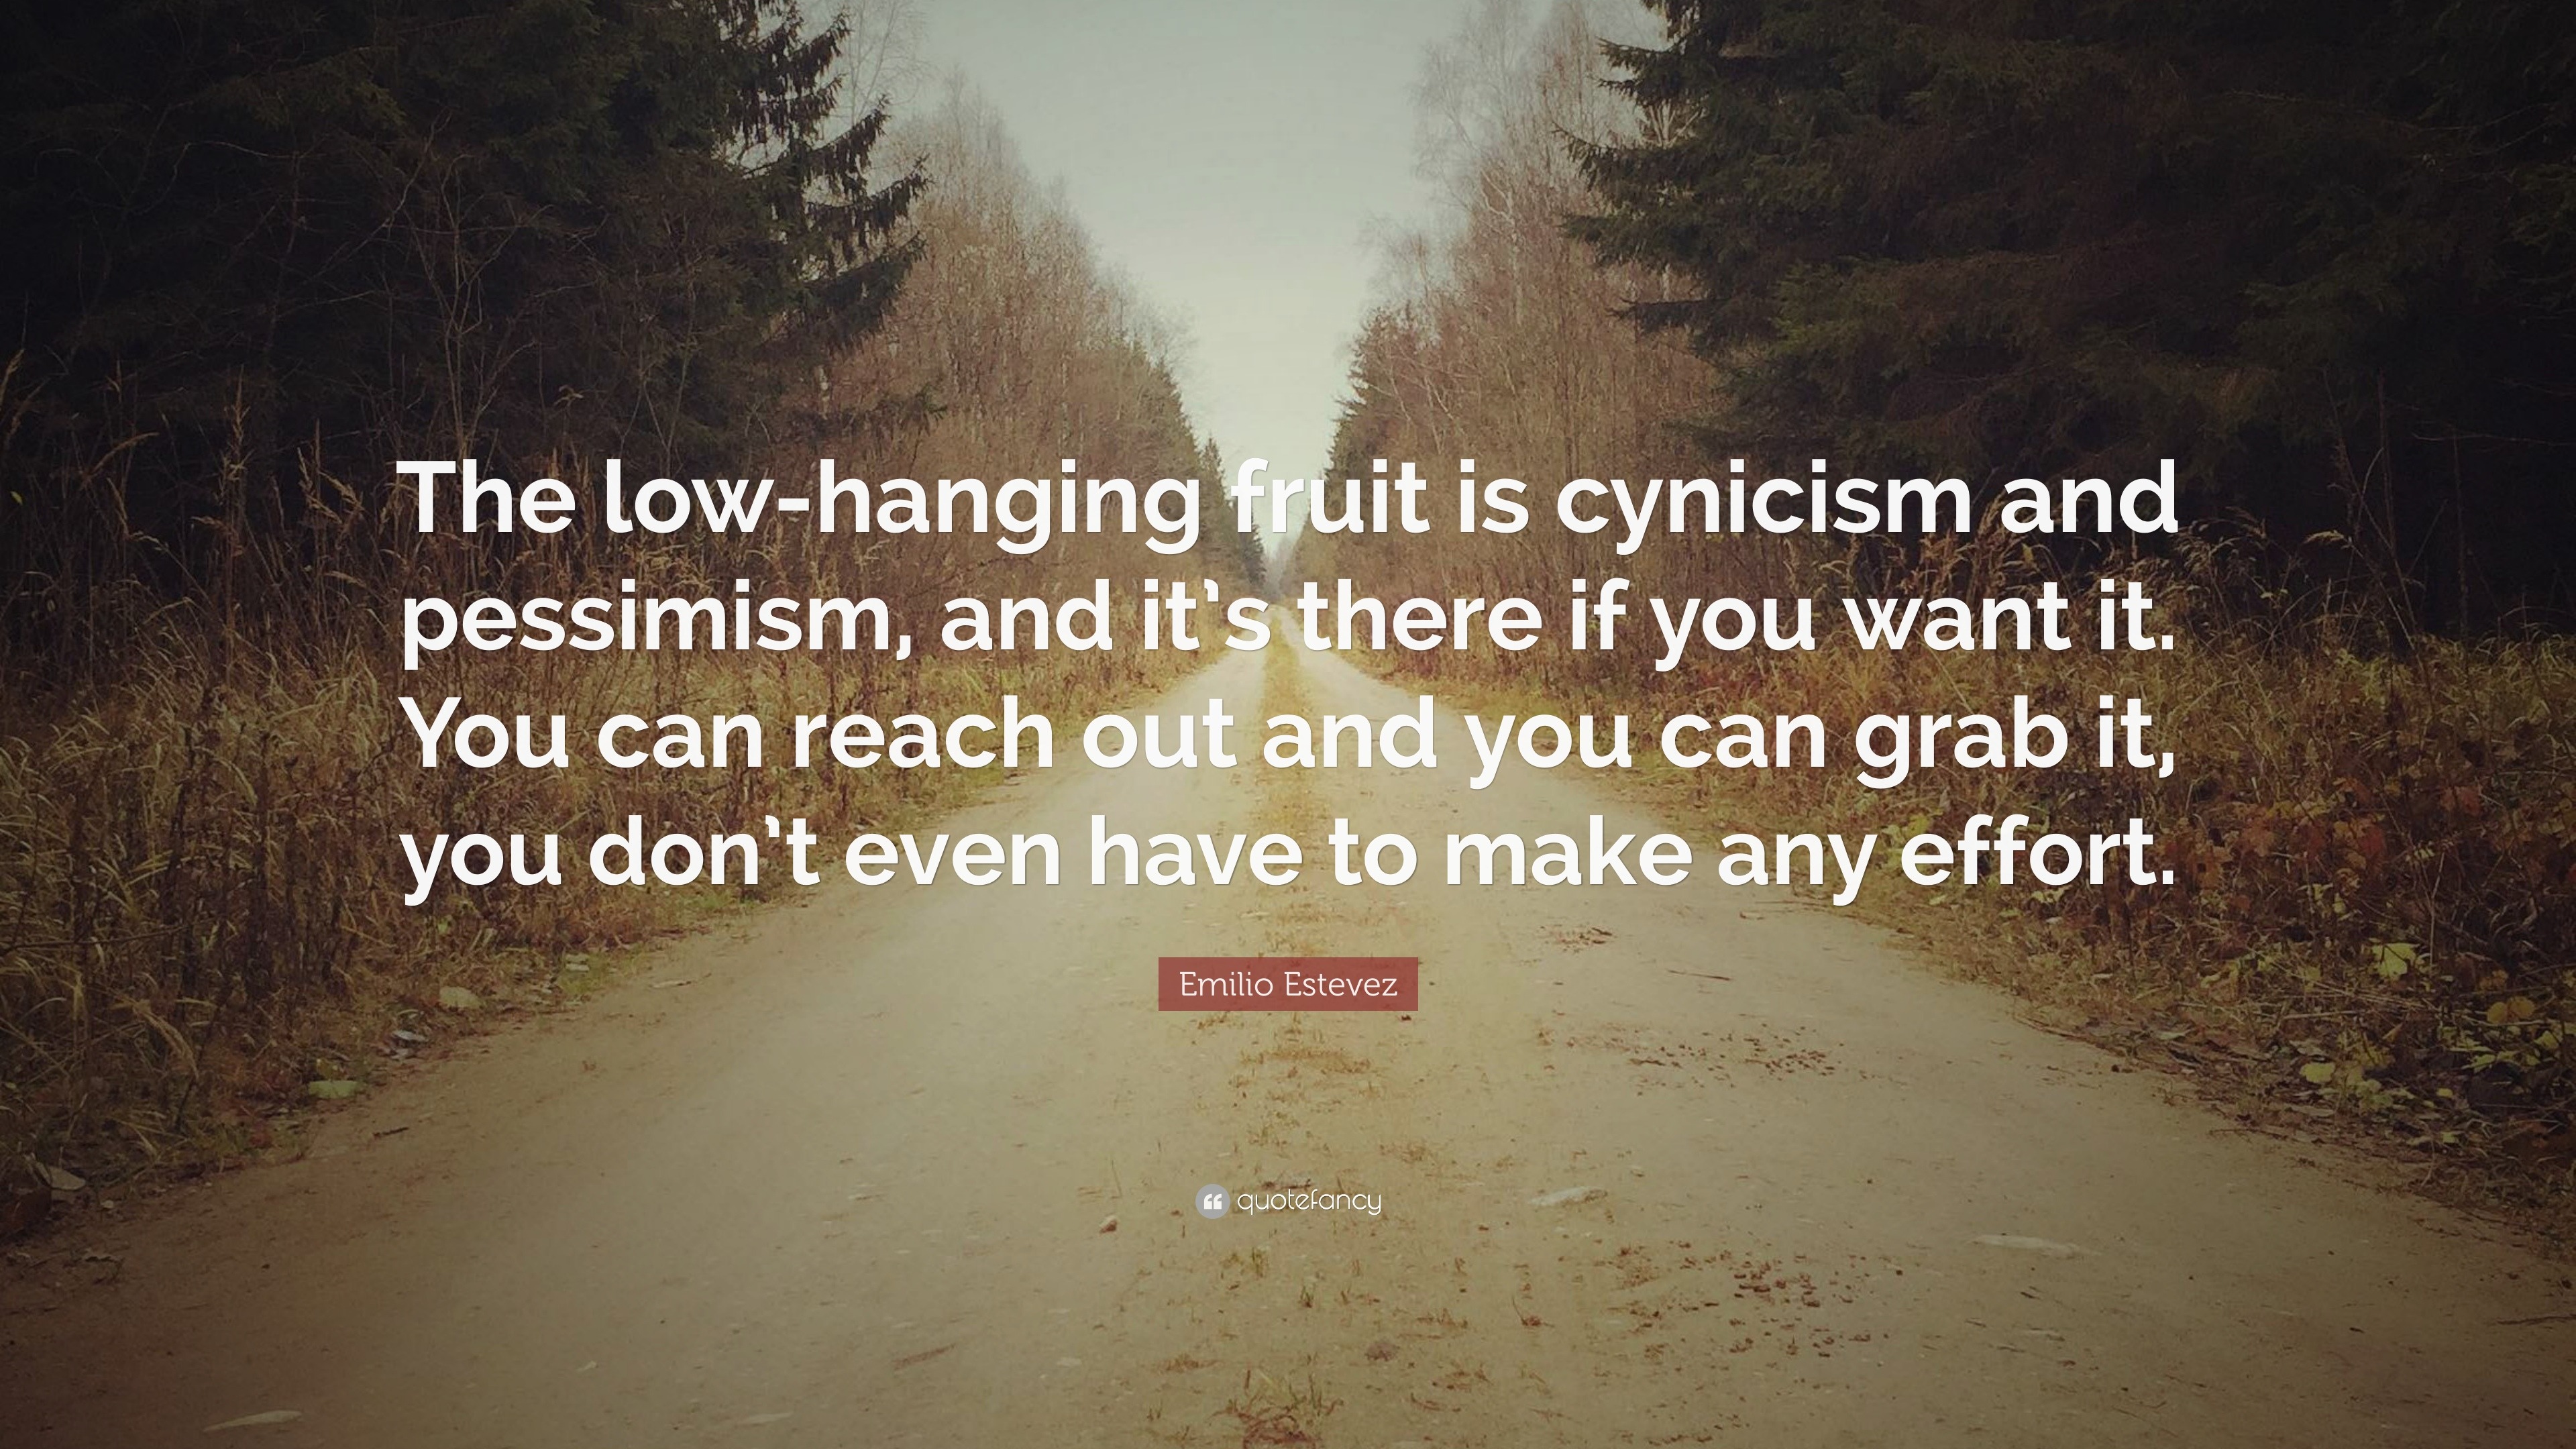 Emilio Estevez Quote The Low Hanging Fruit Is Cynicism And Pessimism And It S There If You Want It You Can Reach Out And You Can Grab It Y